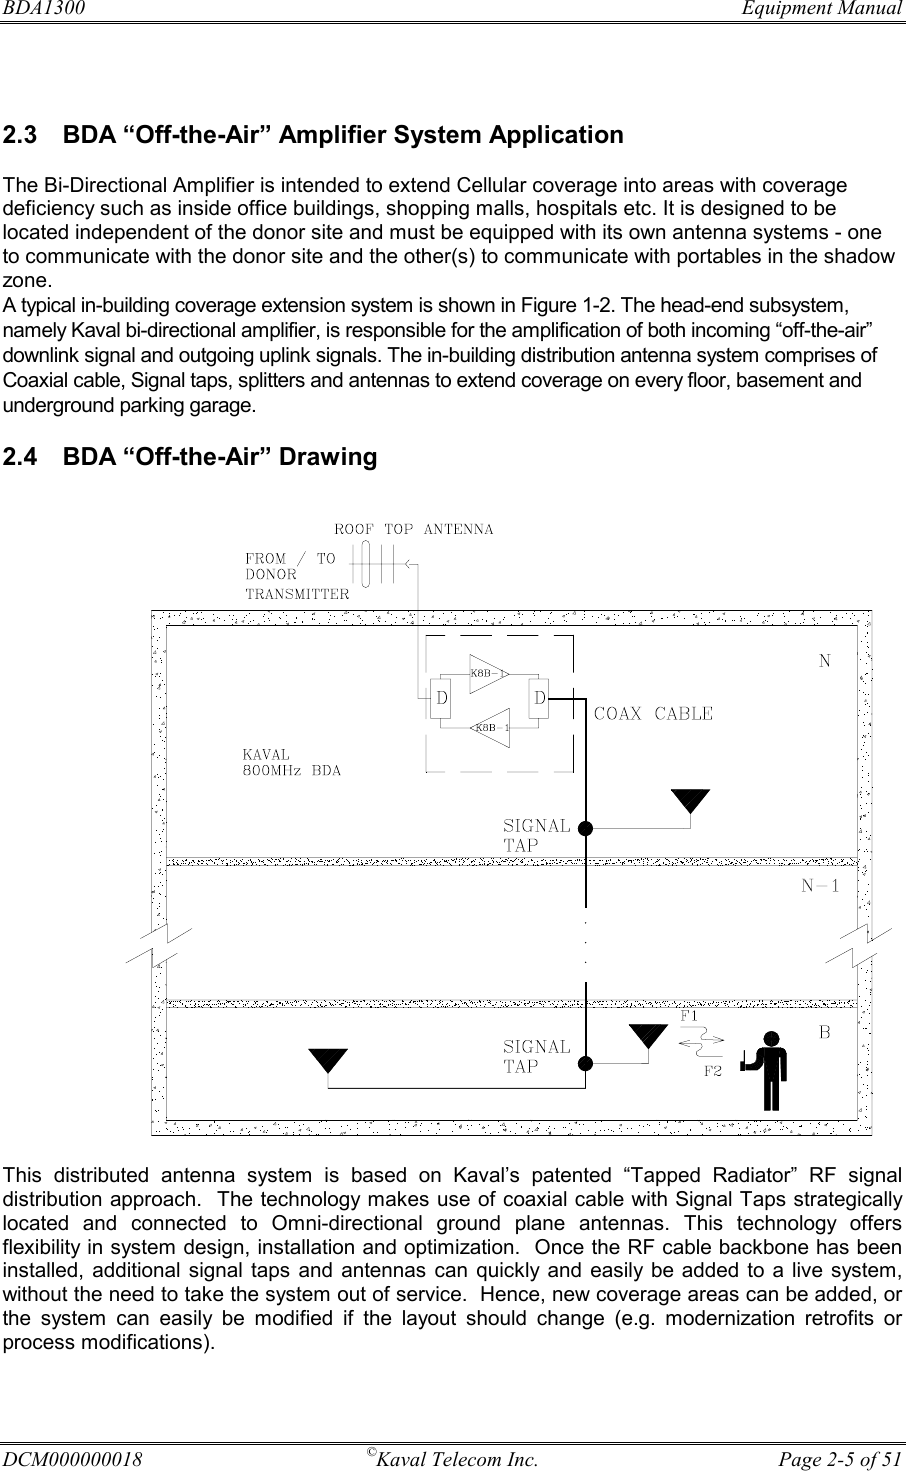 BDA1300     Equipment Manual DCM000000018  ©Kaval Telecom Inc.  Page 2-5 of 51   2.3  BDA “Off-the-Air” Amplifier System Application   The Bi-Directional Amplifier is intended to extend Cellular coverage into areas with coverage deficiency such as inside office buildings, shopping malls, hospitals etc. It is designed to be located independent of the donor site and must be equipped with its own antenna systems - one to communicate with the donor site and the other(s) to communicate with portables in the shadow zone.   A typical in-building coverage extension system is shown in Figure 1-2. The head-end subsystem, namely Kaval bi-directional amplifier, is responsible for the amplification of both incoming “off-the-air” downlink signal and outgoing uplink signals. The in-building distribution antenna system comprises of Coaxial cable, Signal taps, splitters and antennas to extend coverage on every floor, basement and underground parking garage. 2.4  BDA “Off-the-Air” Drawing   This distributed antenna system is based on Kaval’s patented “Tapped Radiator” RF signal distribution approach.  The technology makes use of coaxial cable with Signal Taps strategically located and connected to Omni-directional ground plane antennas. This technology offers flexibility in system design, installation and optimization.  Once the RF cable backbone has been installed, additional signal taps and antennas can quickly and easily be added to a live system, without the need to take the system out of service.  Hence, new coverage areas can be added, or the system can easily be modified if the layout should change (e.g. modernization retrofits or process modifications). 